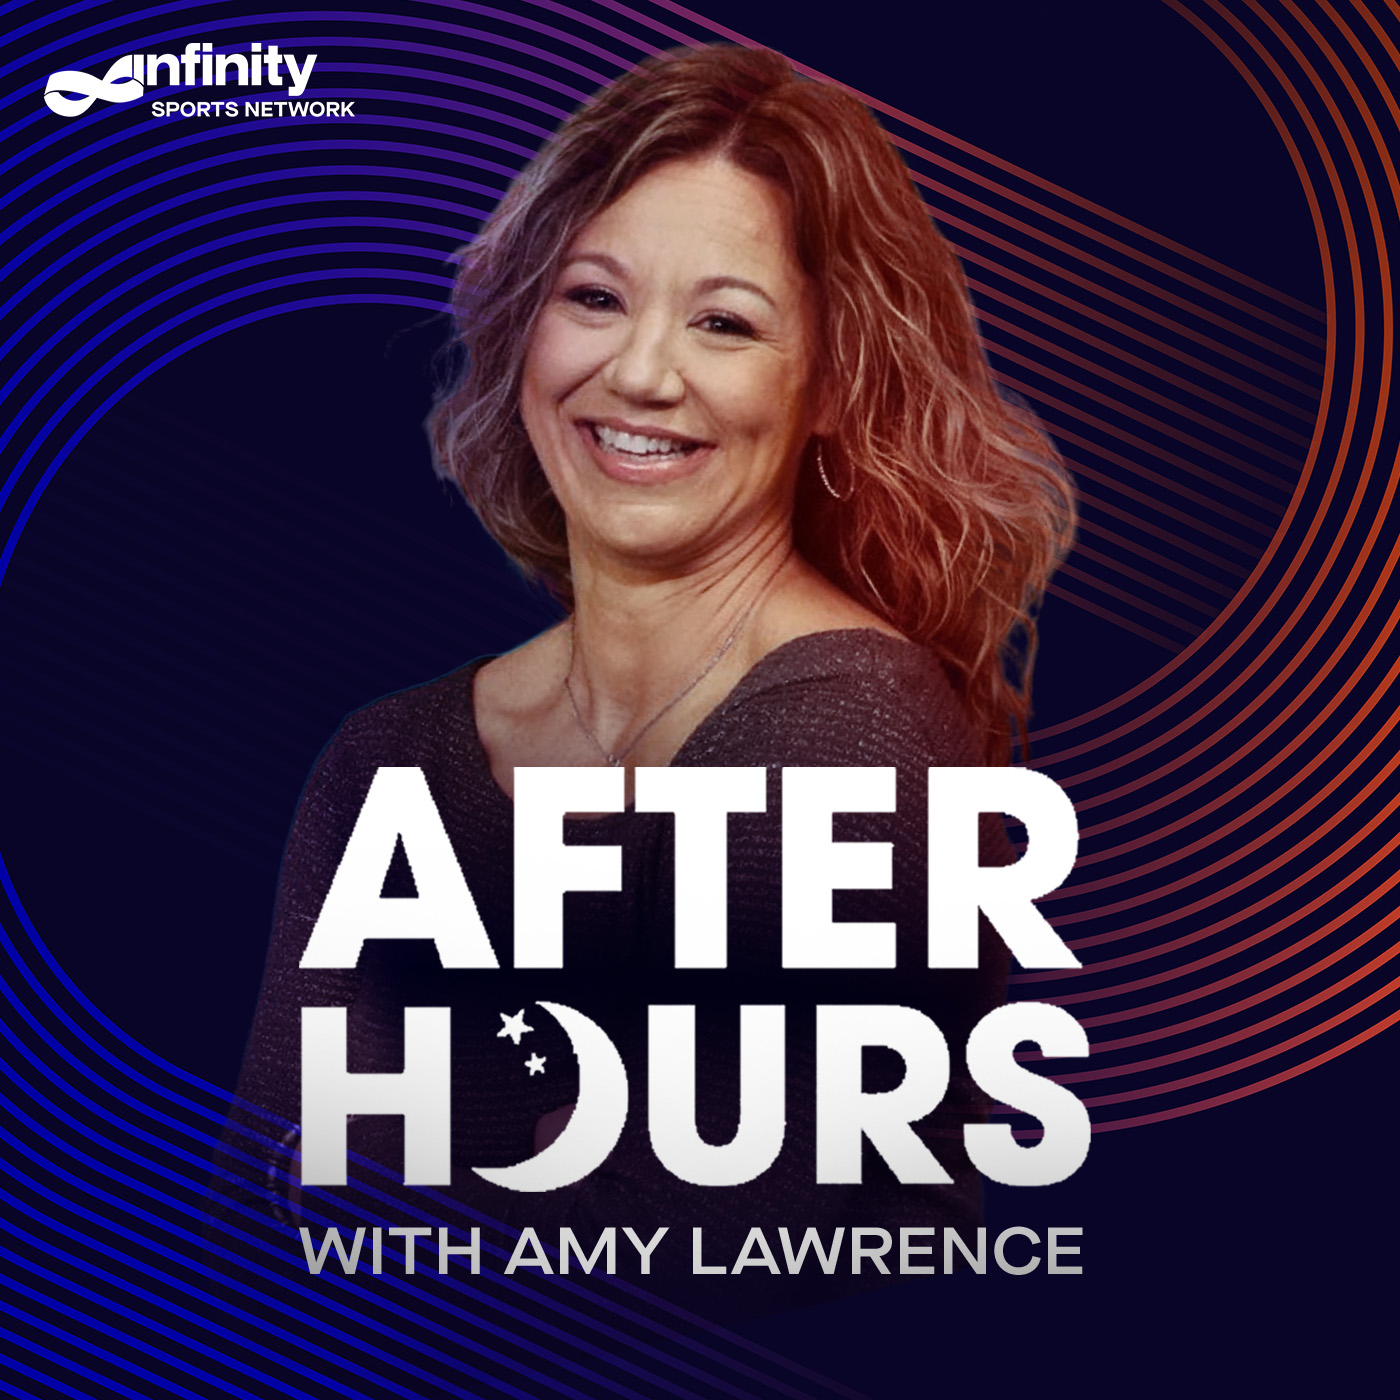 4/21/21 After Hours with Amy Lawrence PODCAST: Hour 3